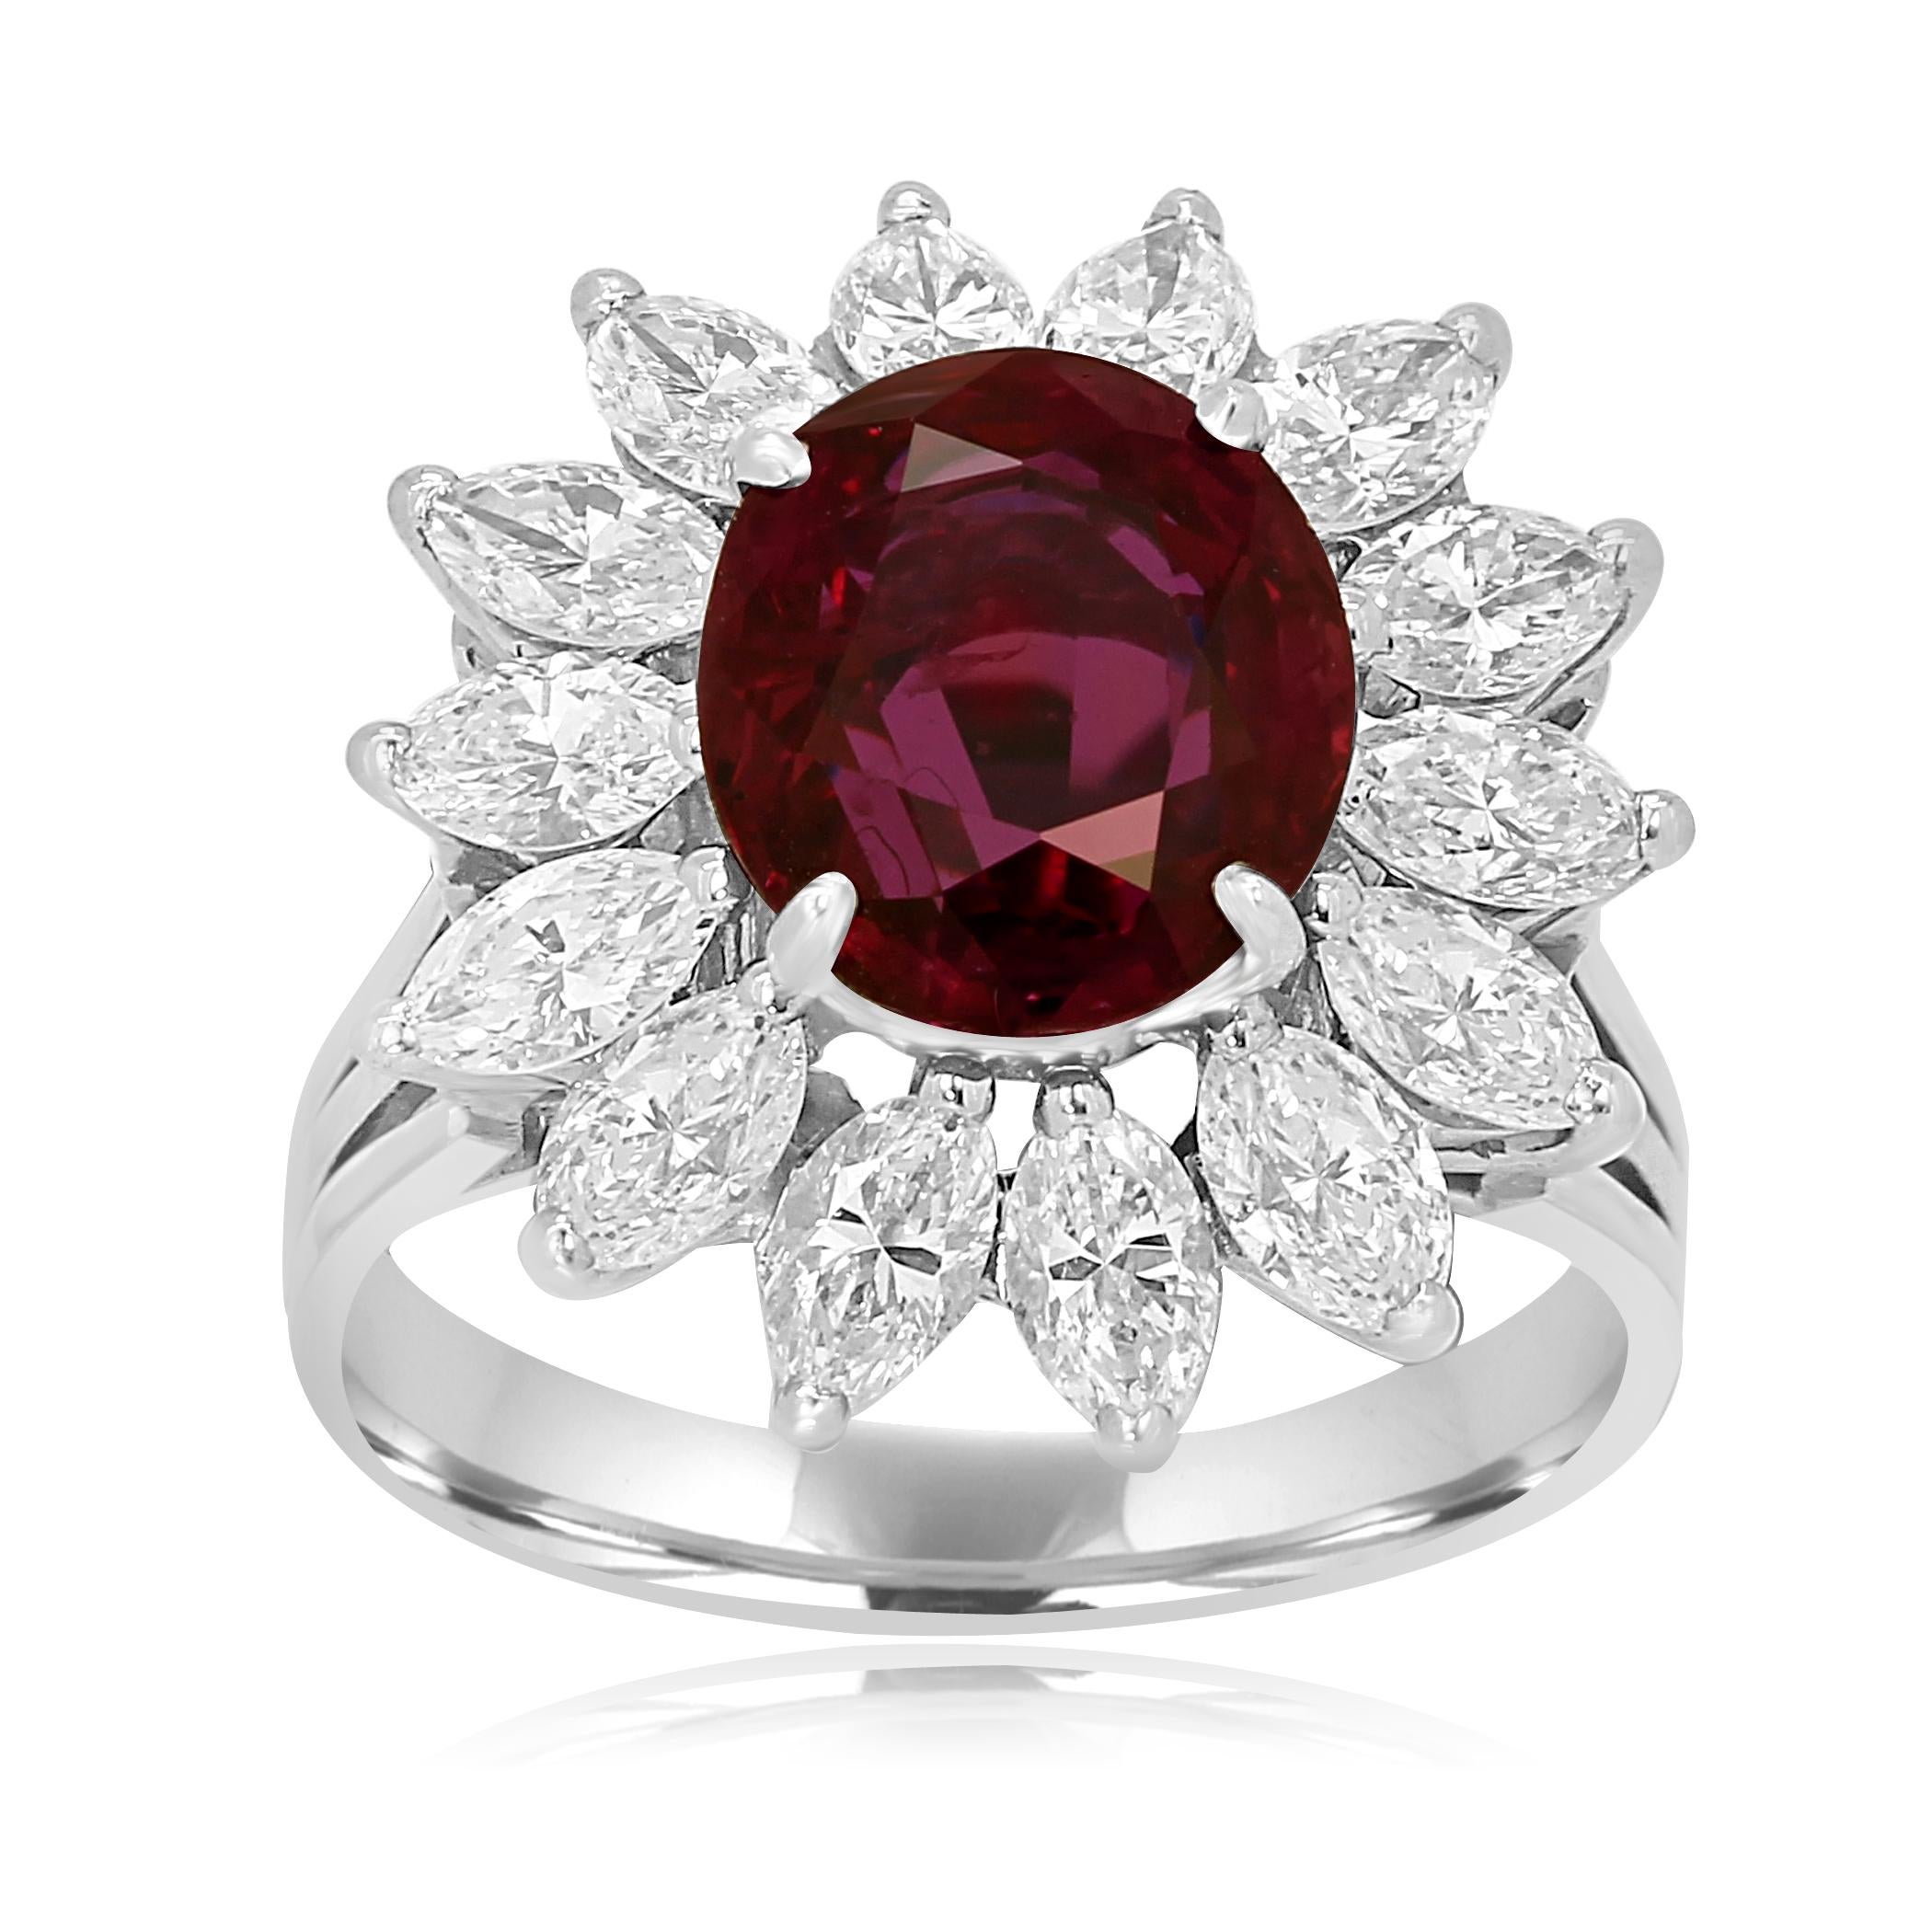 Gorgeous GIA Certified Thai Ruby Oval 4.01 Carat encircled in a single Halo White Marquise Diamond  approximately 3.20 Carat in Hand made platinum ring.

Center Ruby Oval weight 4.01 Carat
Total Approximate Weight 7.21 Carat